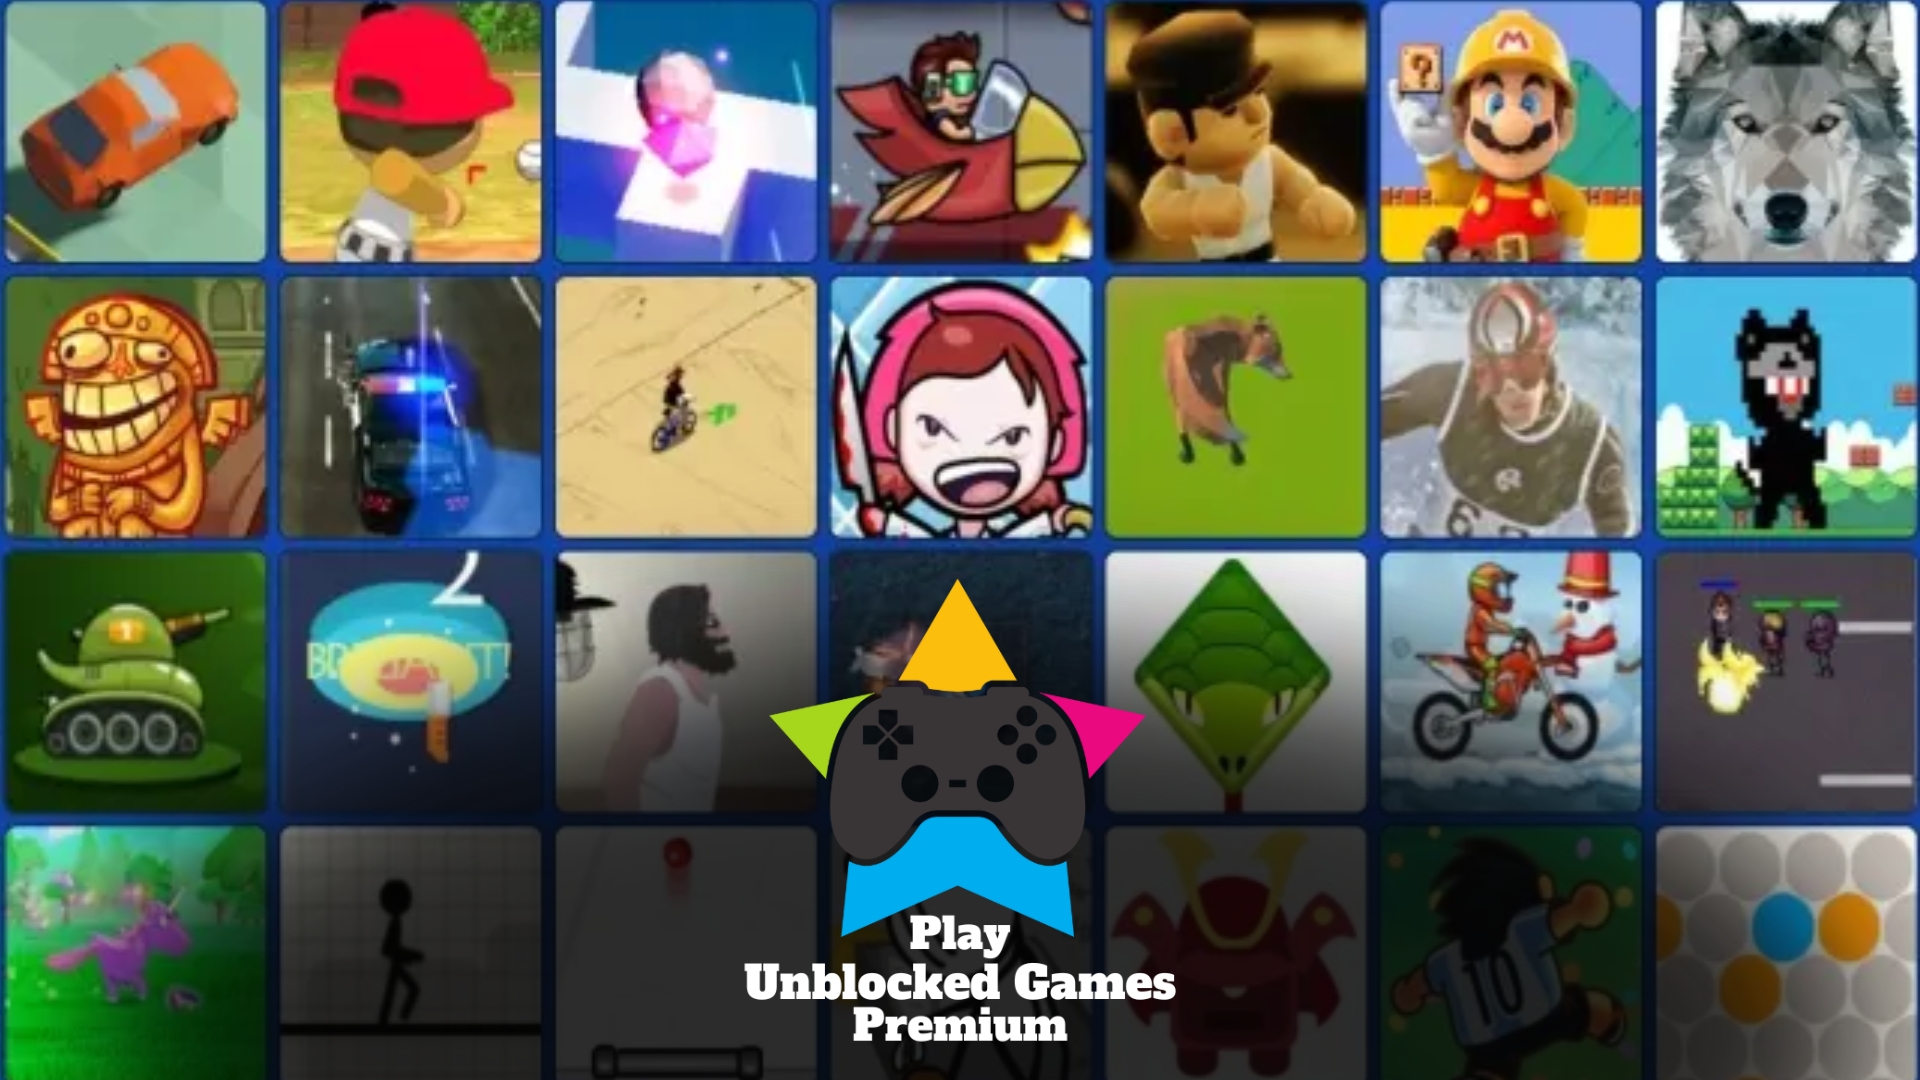 Why are Unblocked Games Blocked